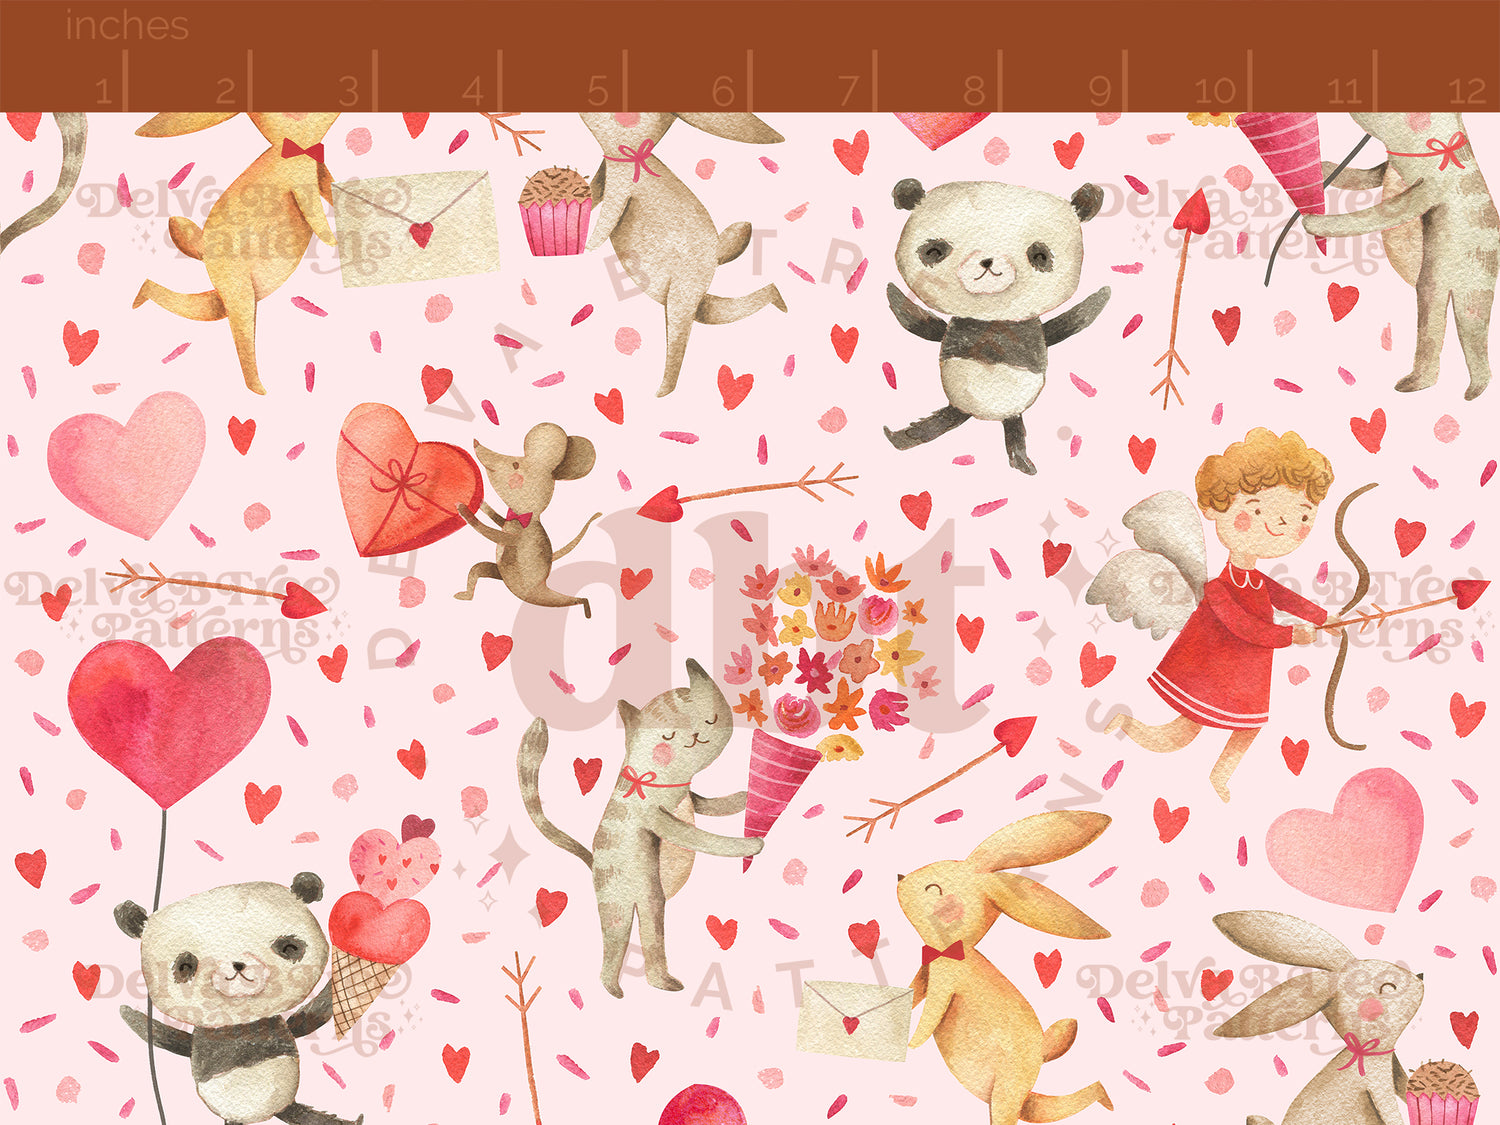 Watercolor cat, mouse, panda, cupid, bunnies, hearts, flowers and arrows sprinkled with fun bits of confetti on a pink seamless pattern scale, digital file for small shops that make handmade products in small batches.